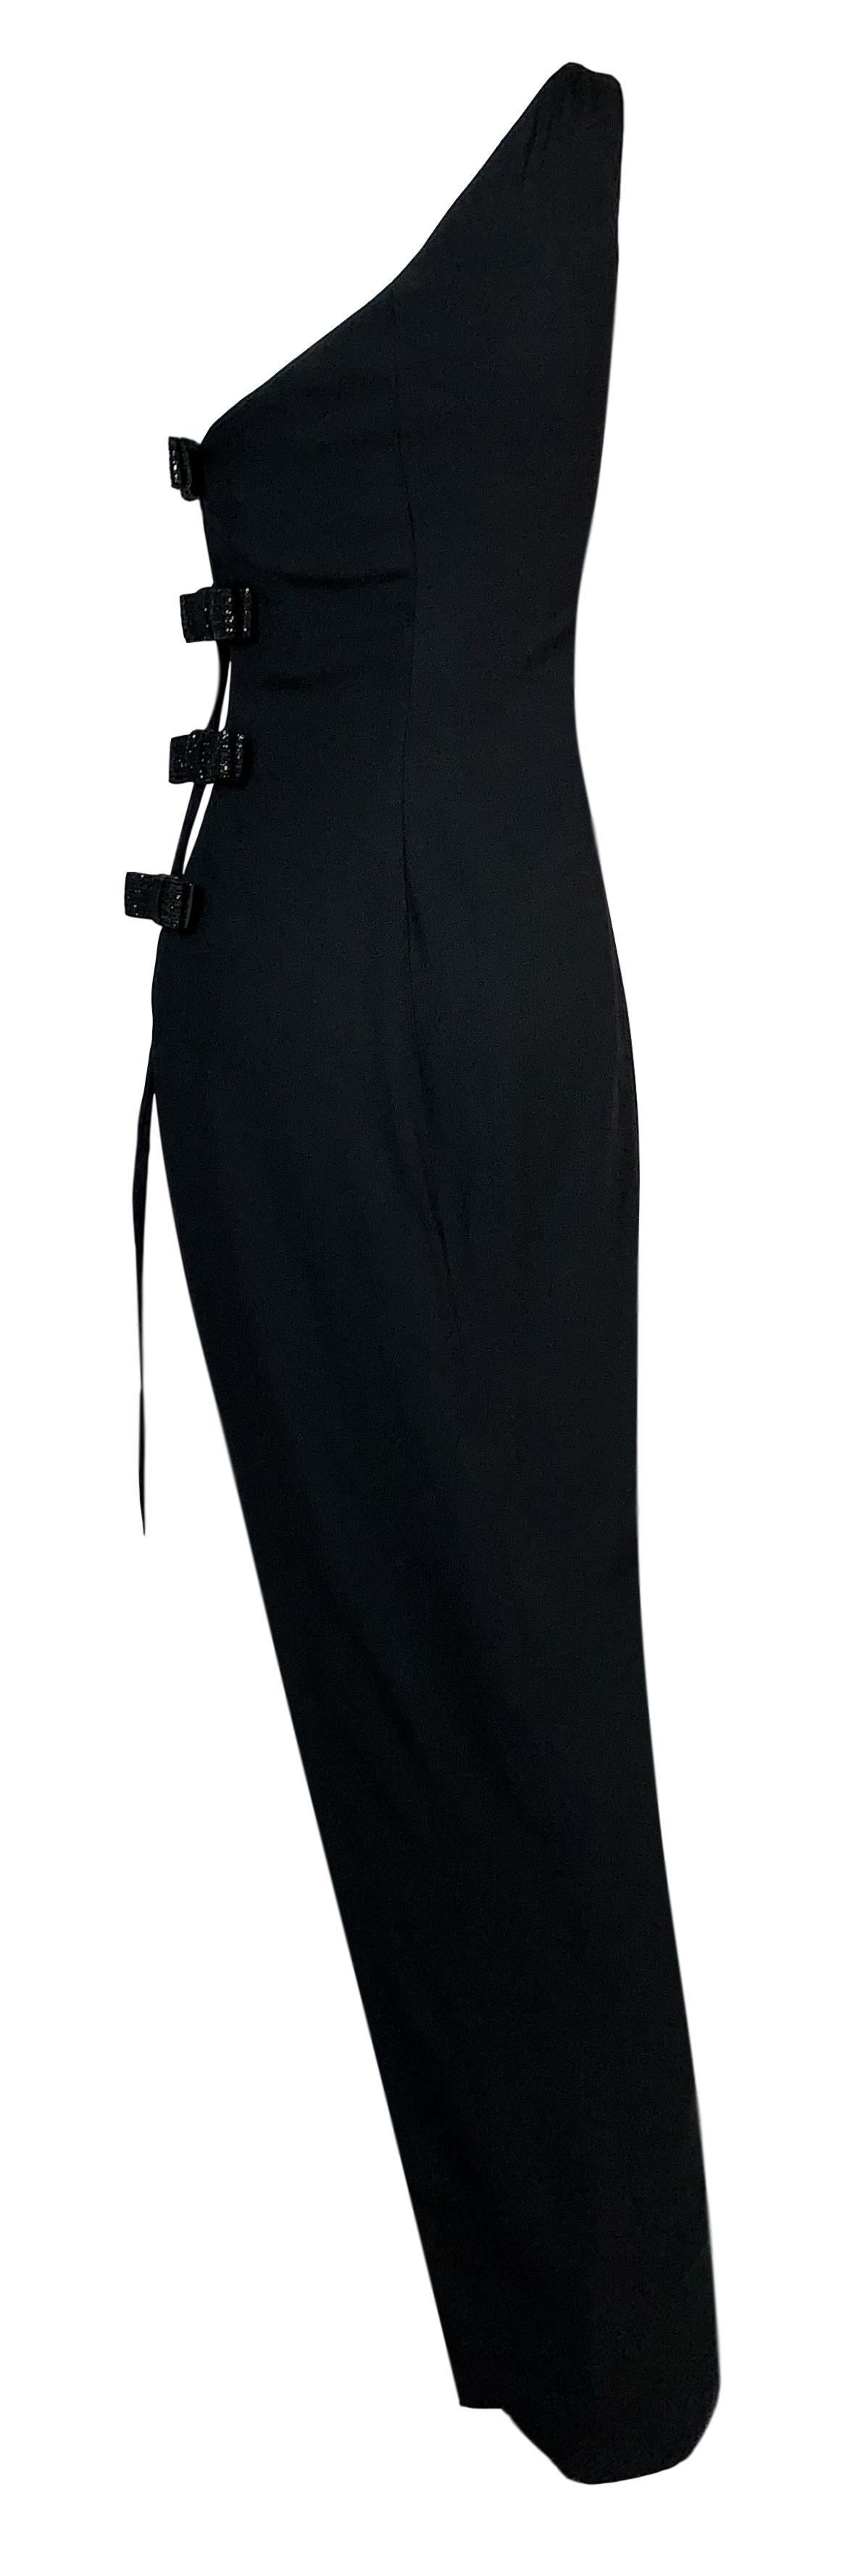 S/S 1997 Christian Dior Runway Black One Shoulder Cut-Out High Slit Maxi Dress In Good Condition In Yukon, OK